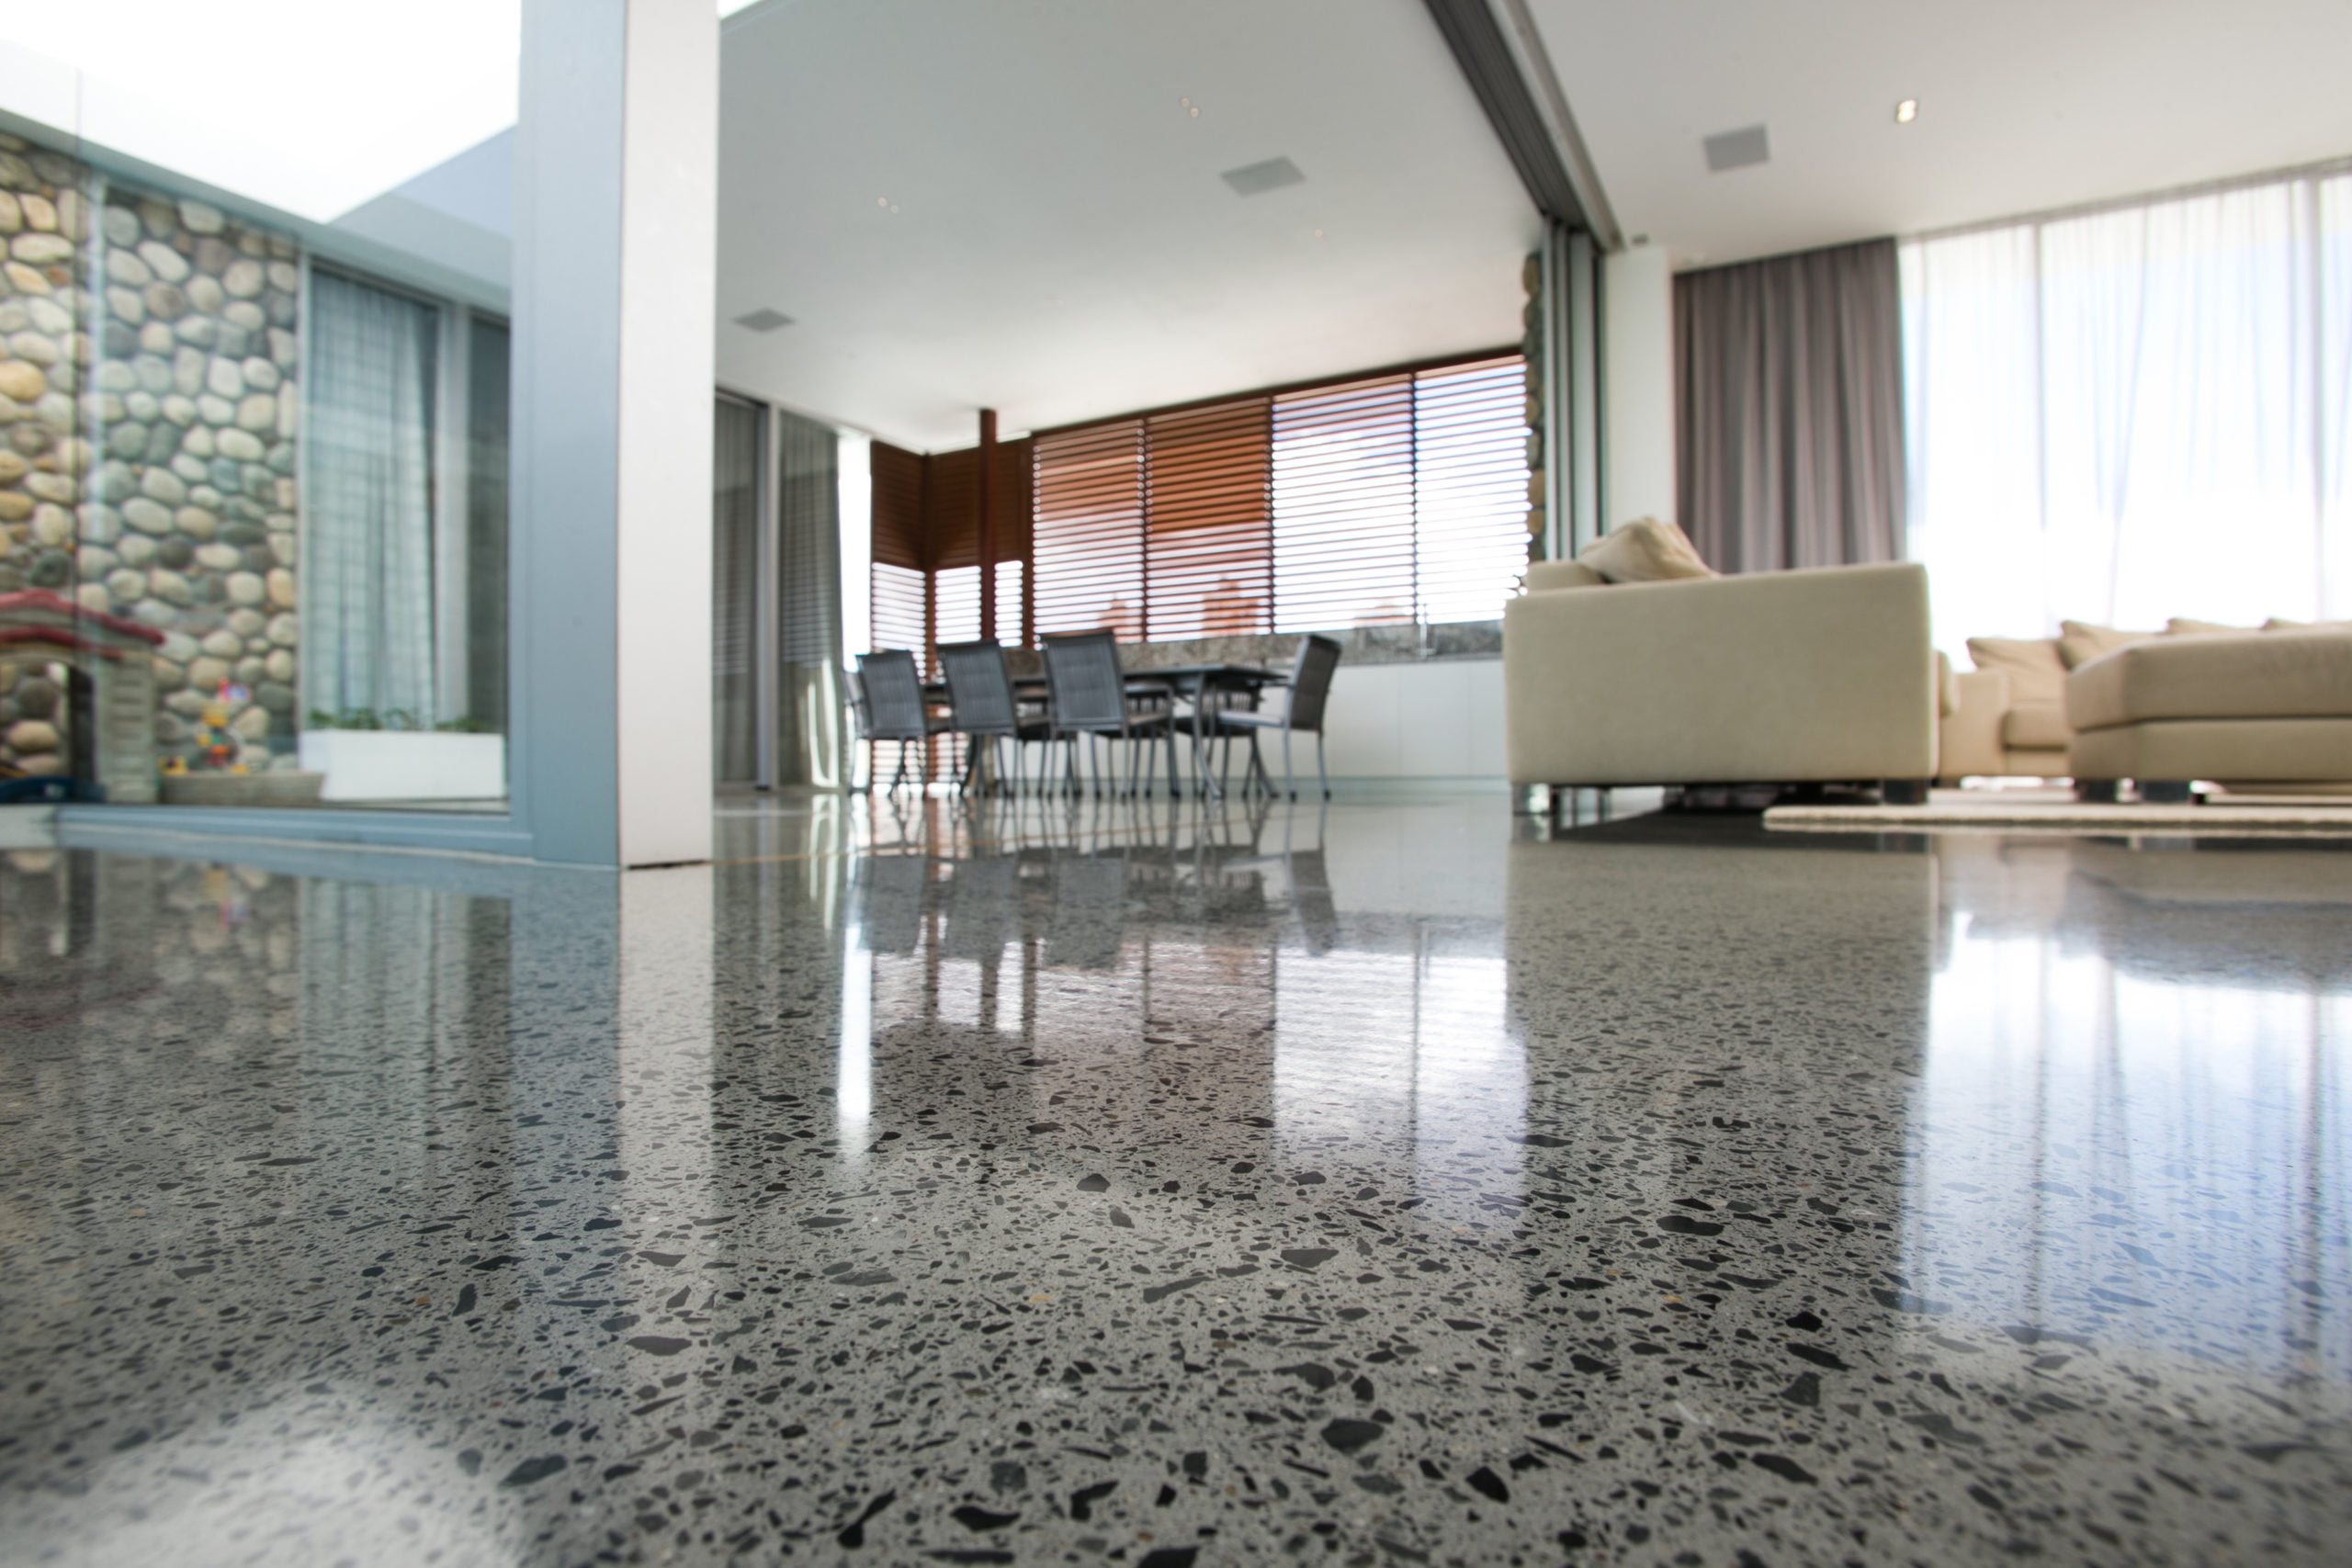 Polished Concrete Floors In Homes Images – Flooring Tips